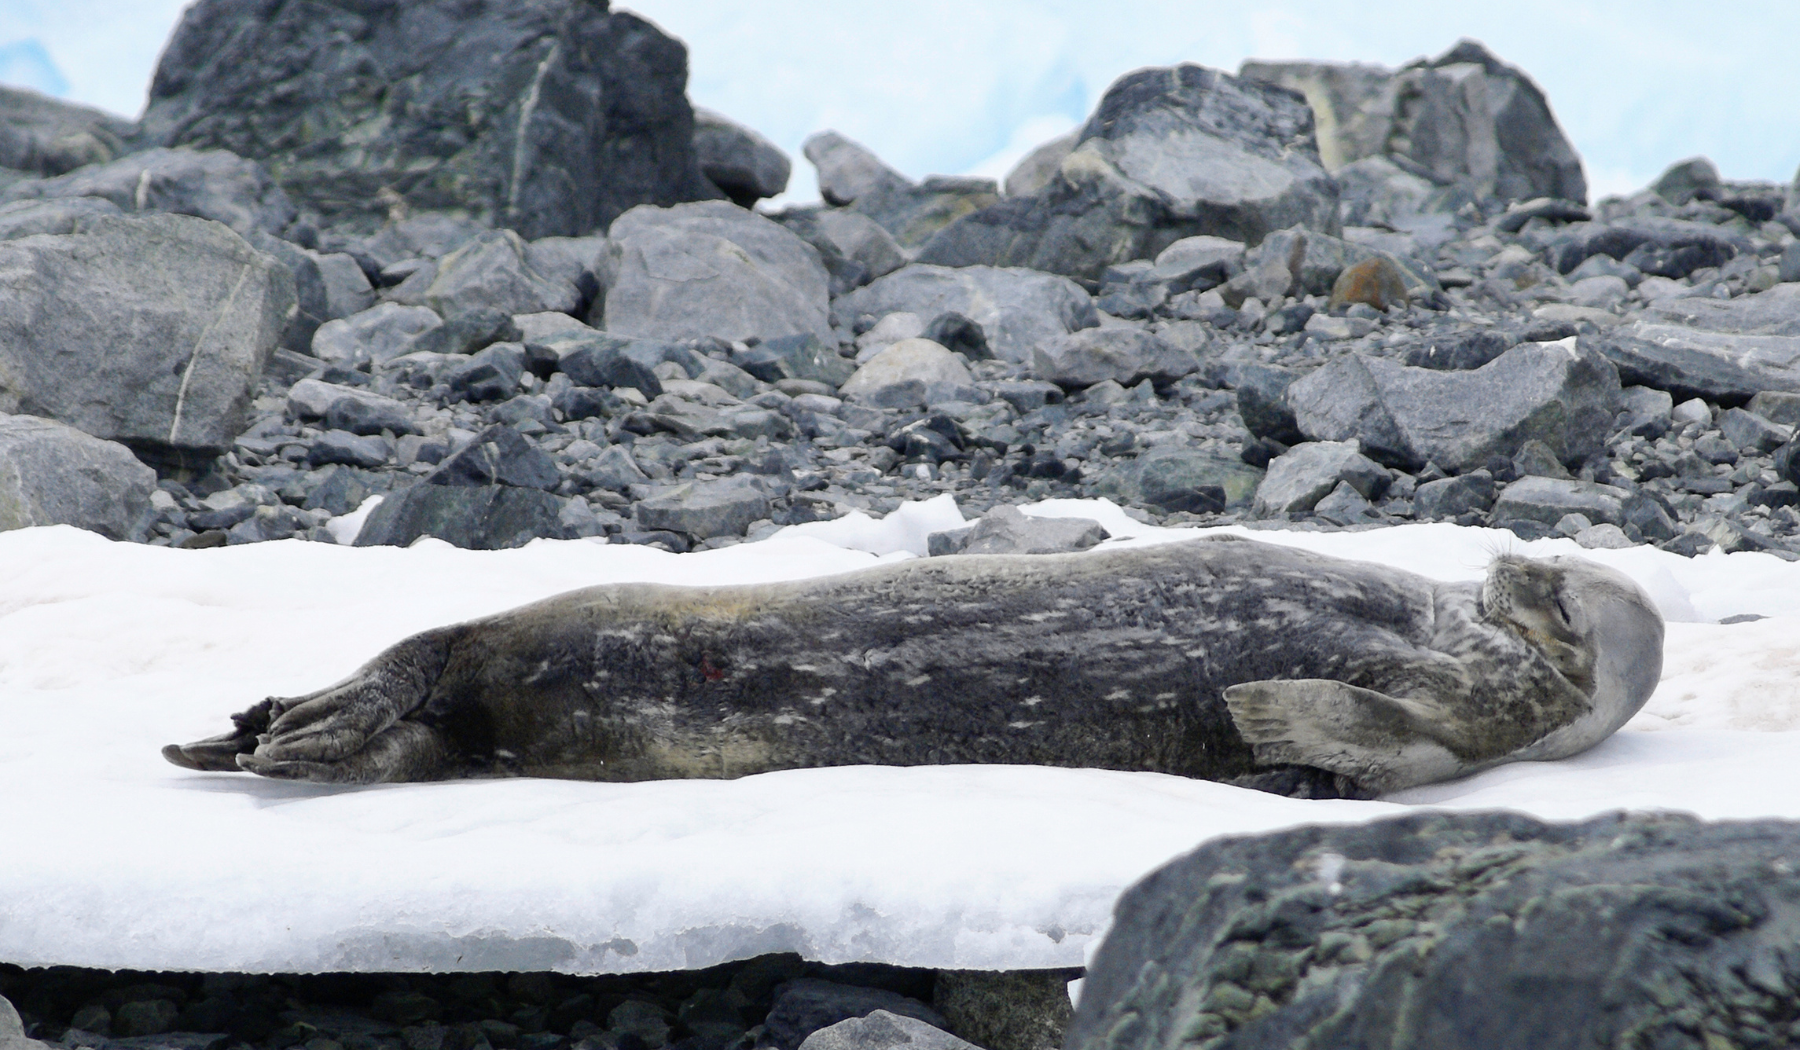 Fun facts about seals on P.E.I.: Amazing, intelligent and beautiful